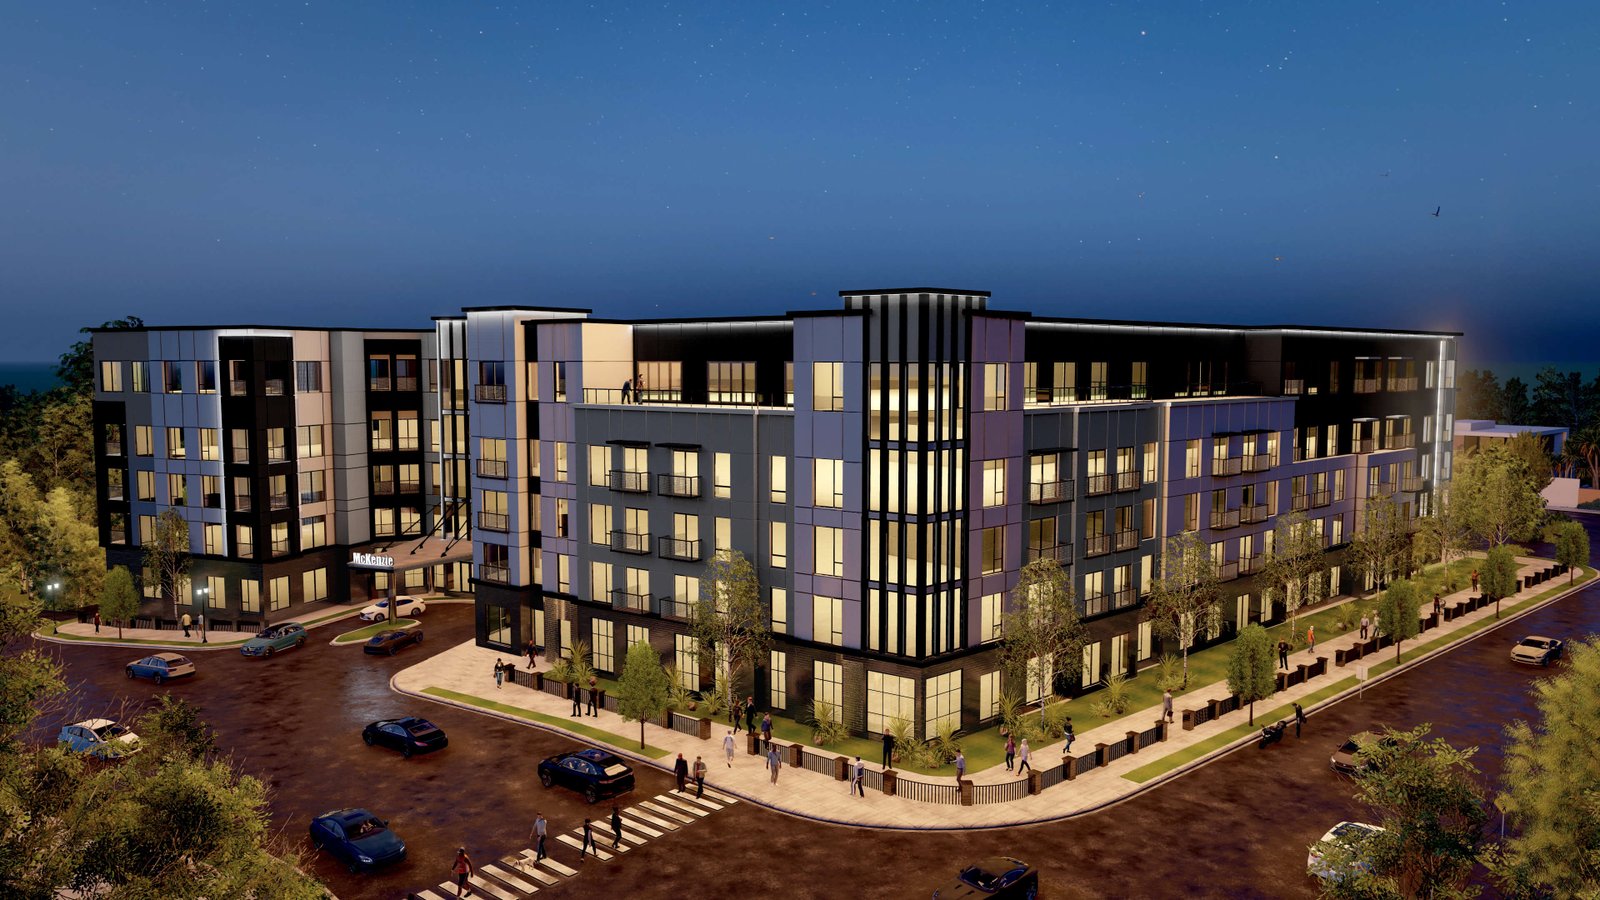 Massive Apartment and Hotel Complex Planned at Delmar and 170